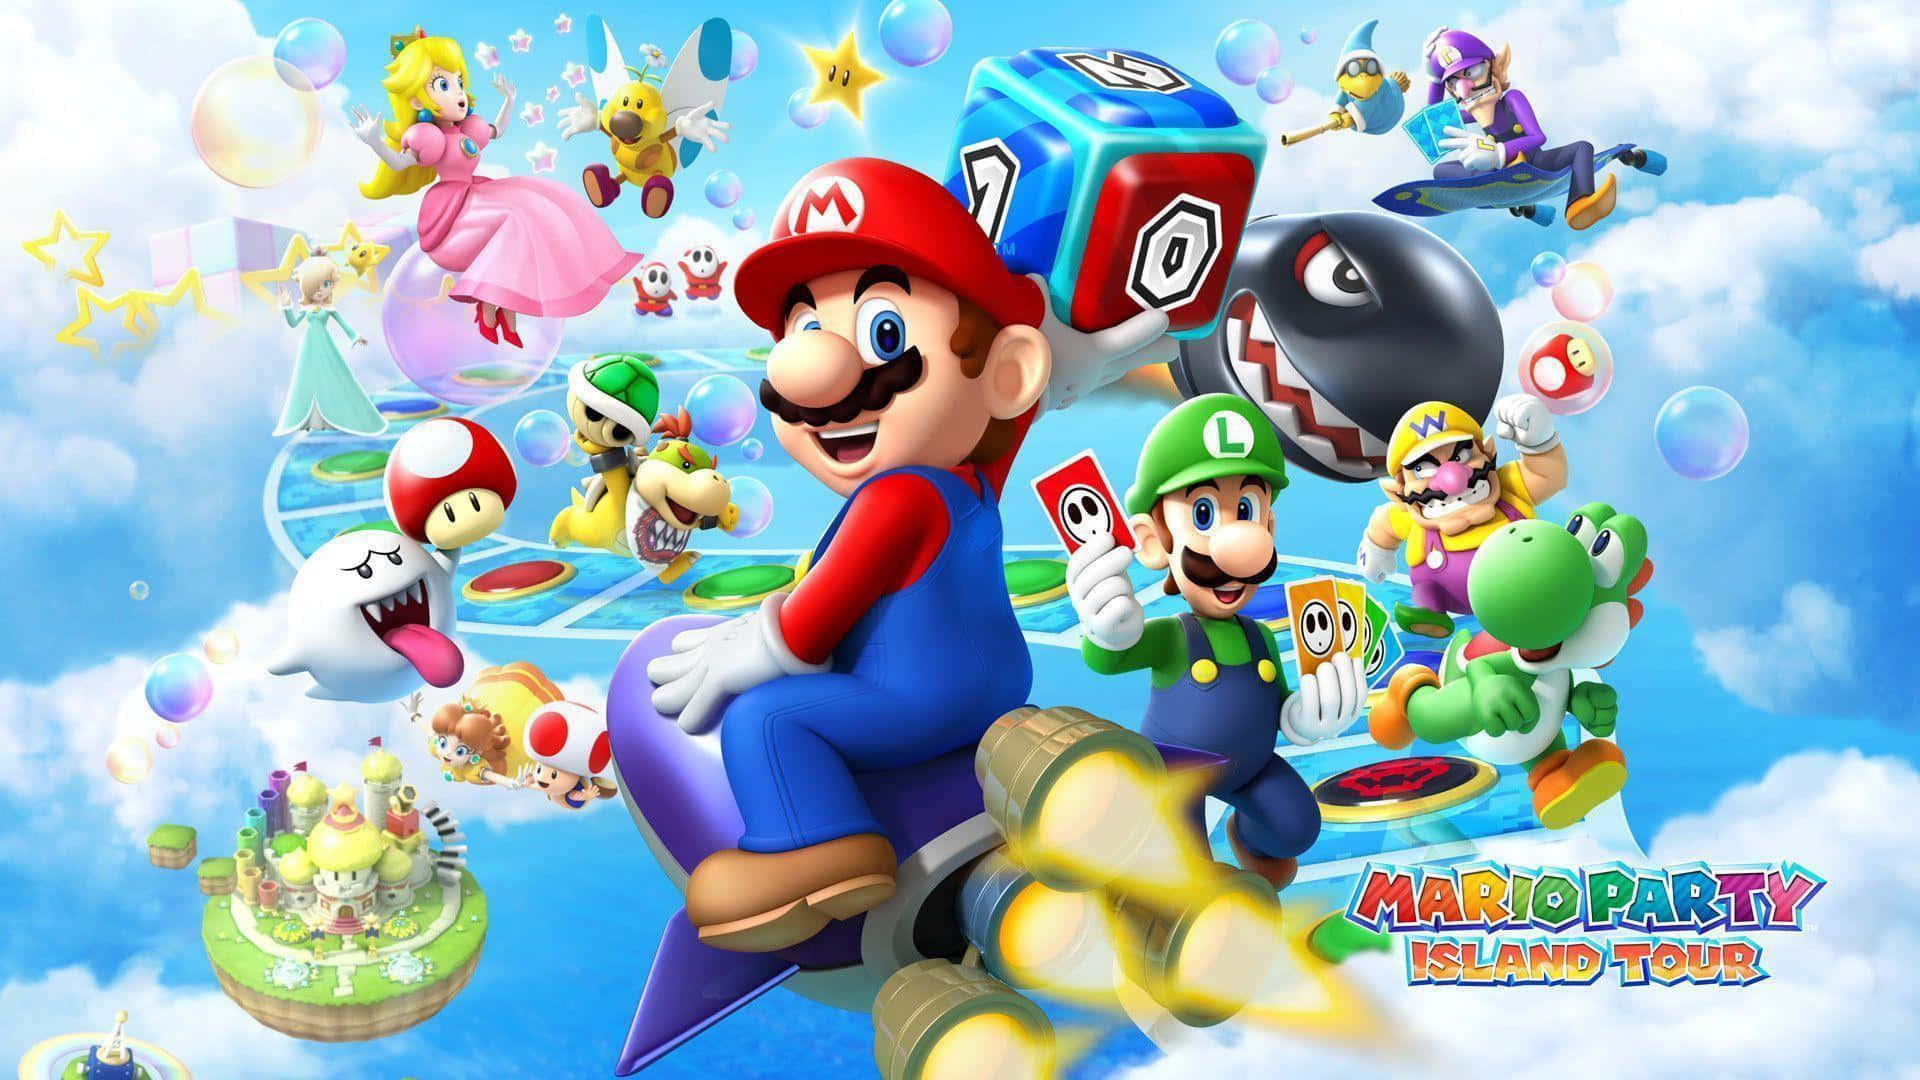 Exciting Mario Party Game Night Wallpaper